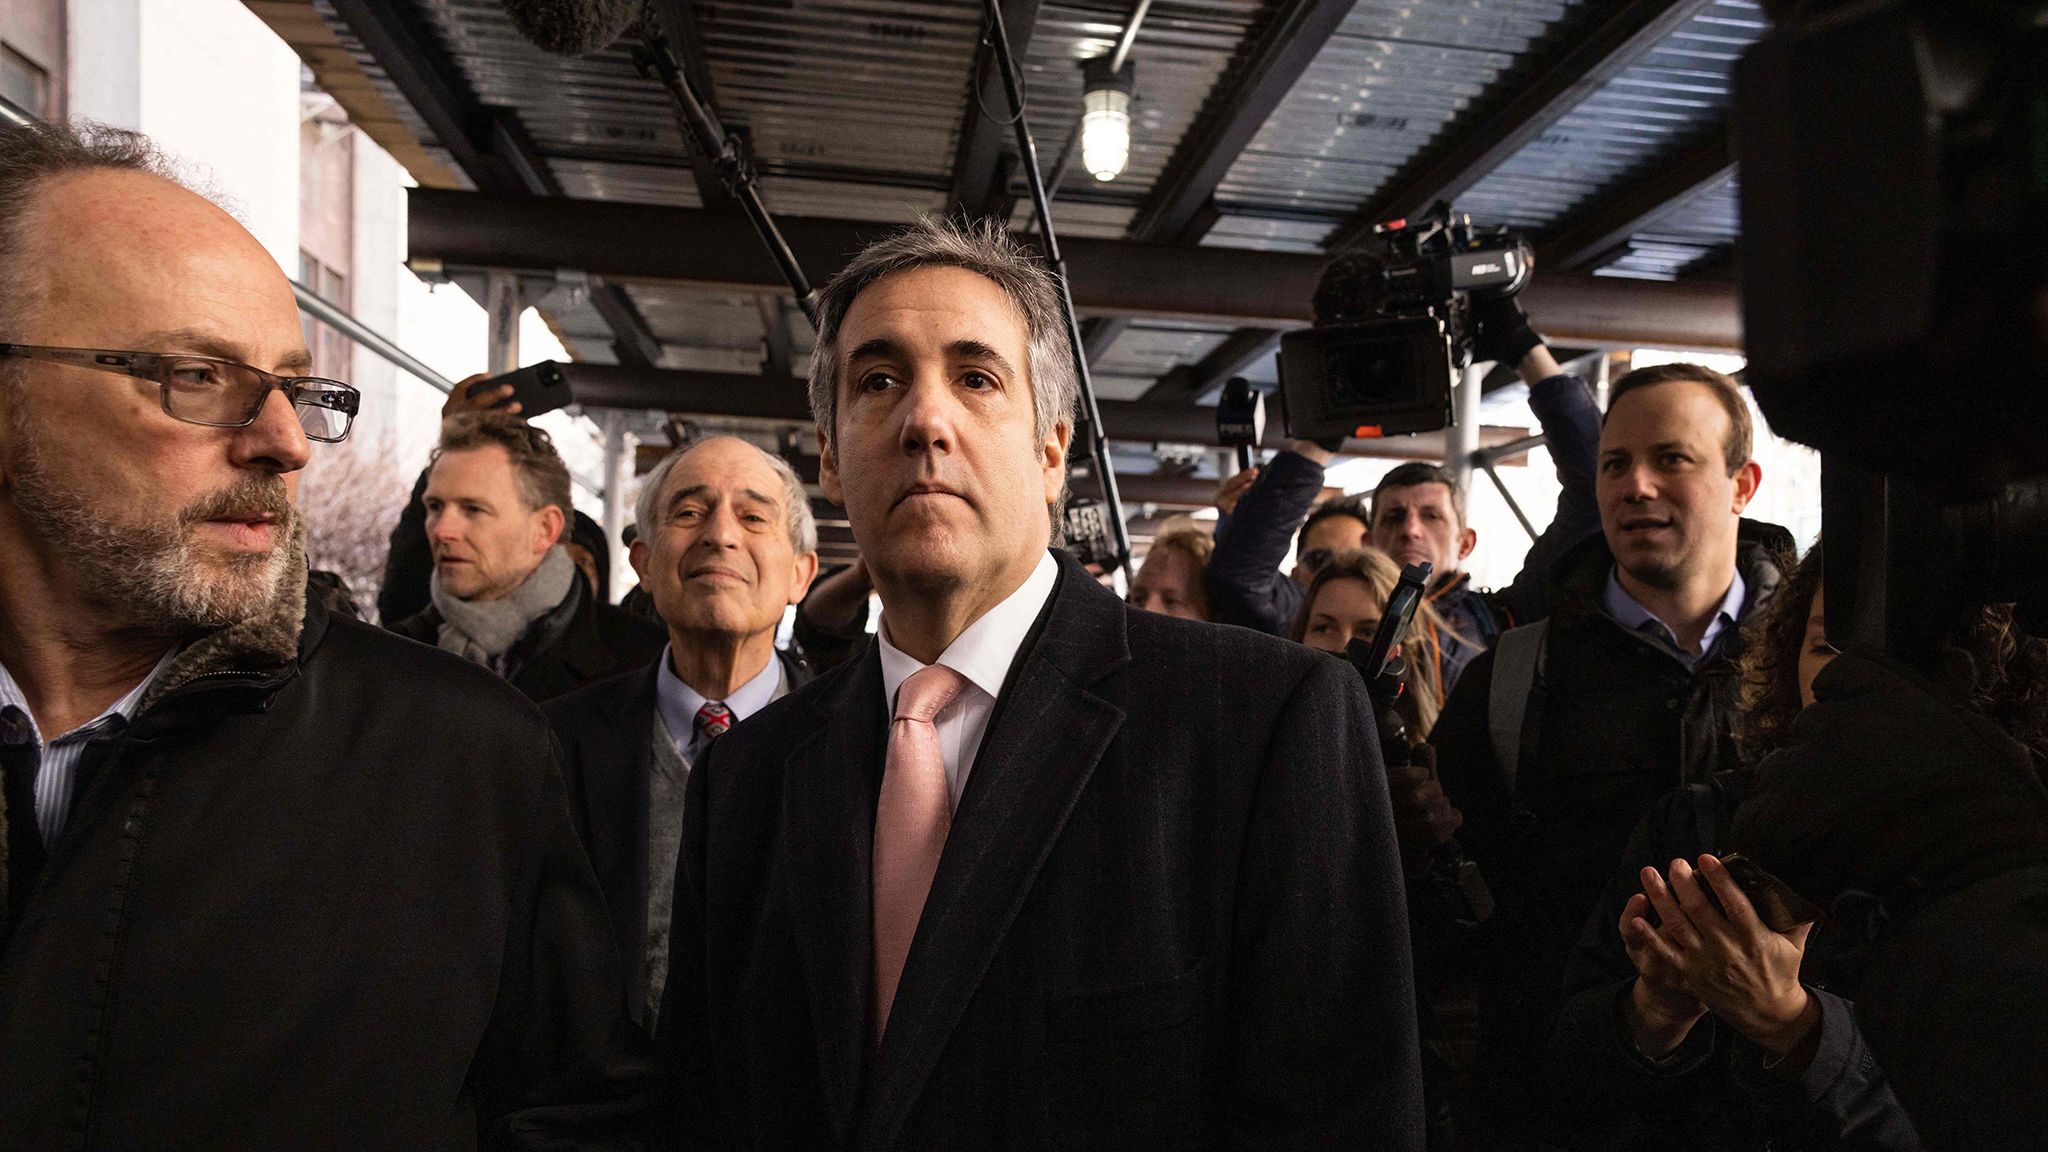 Michael Cohen eating at NYC restaurant could land him back in prison